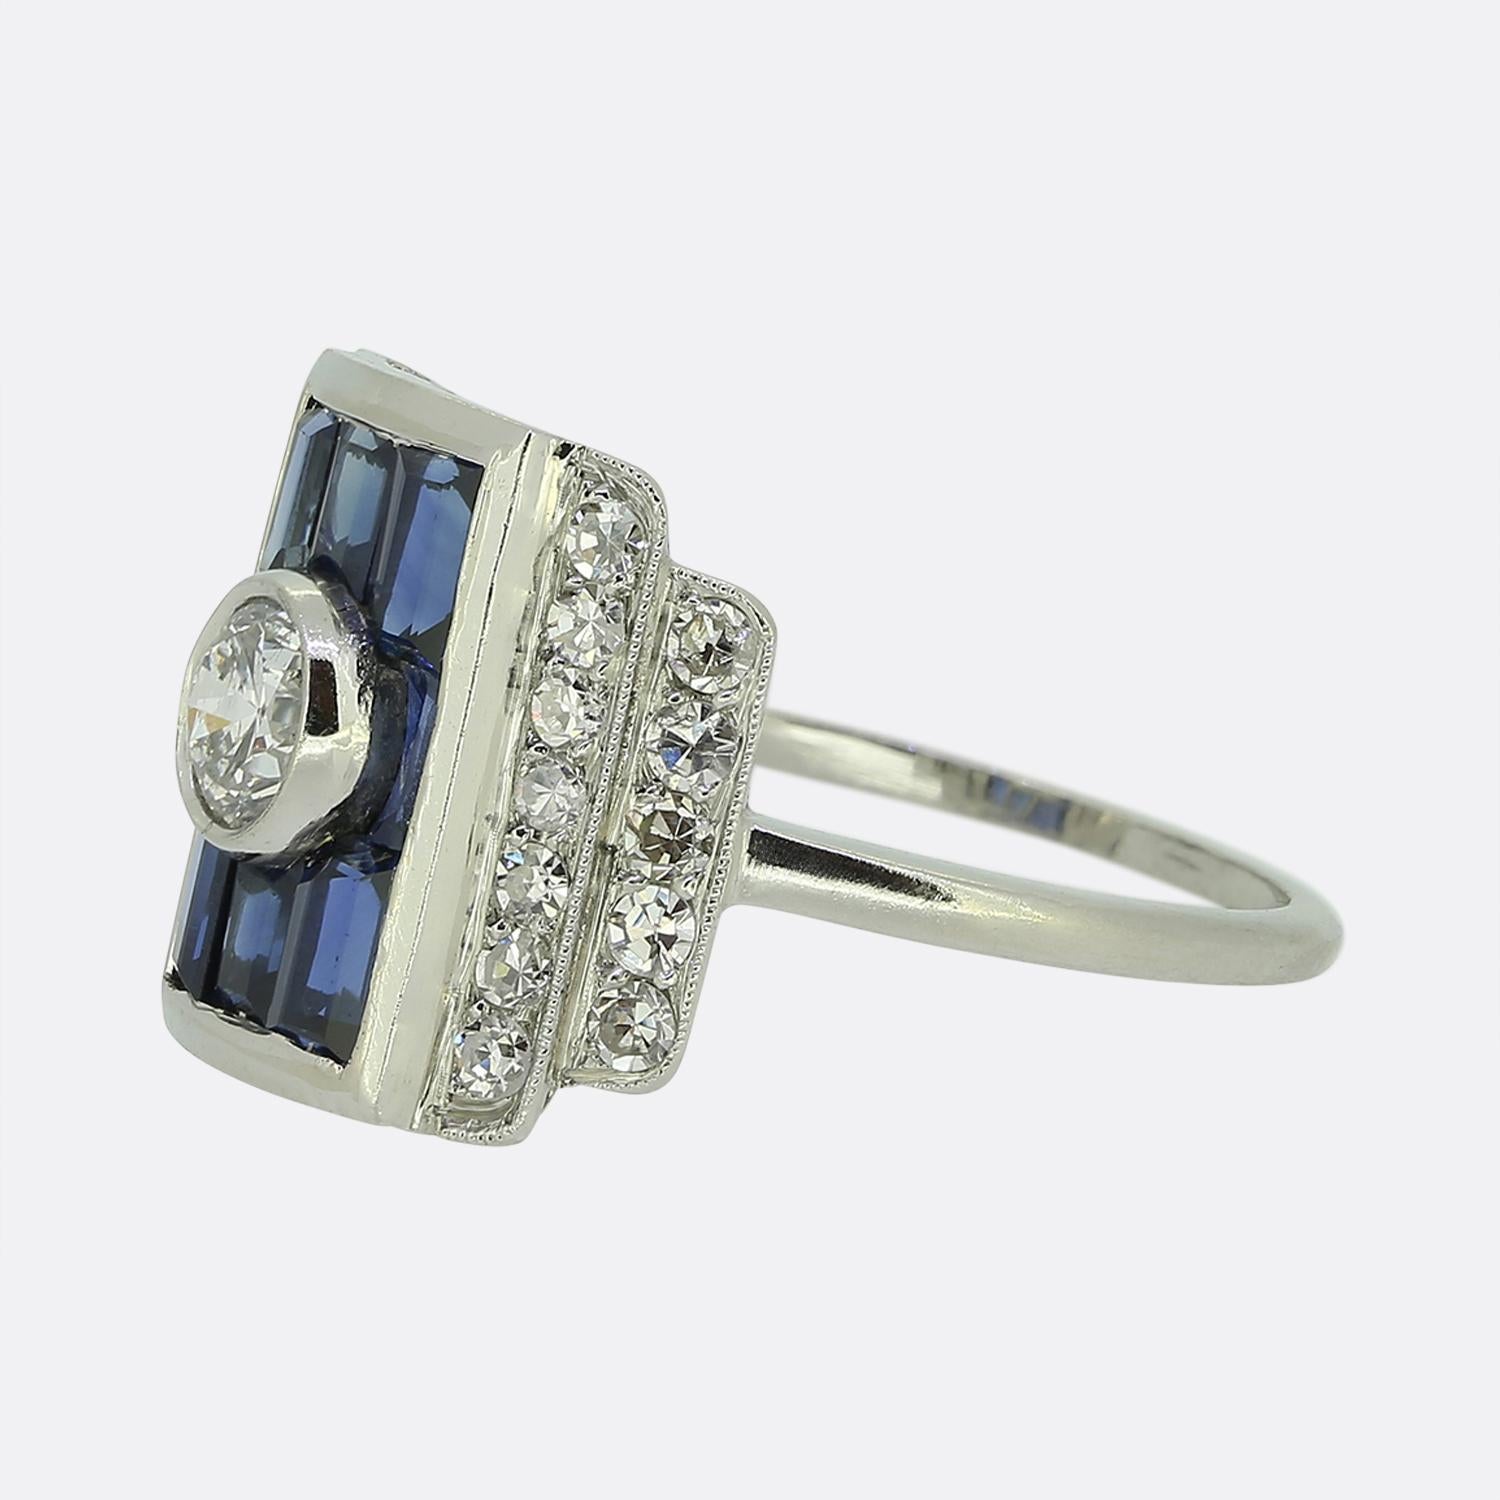 Here we have a fabulous sapphire and diamond cluster ring crafted during the pinnacle of the Art Deco movement. The face of this piece has been crafted from platinum into a concave boxed shape with a single round faceted old cut diamond at the